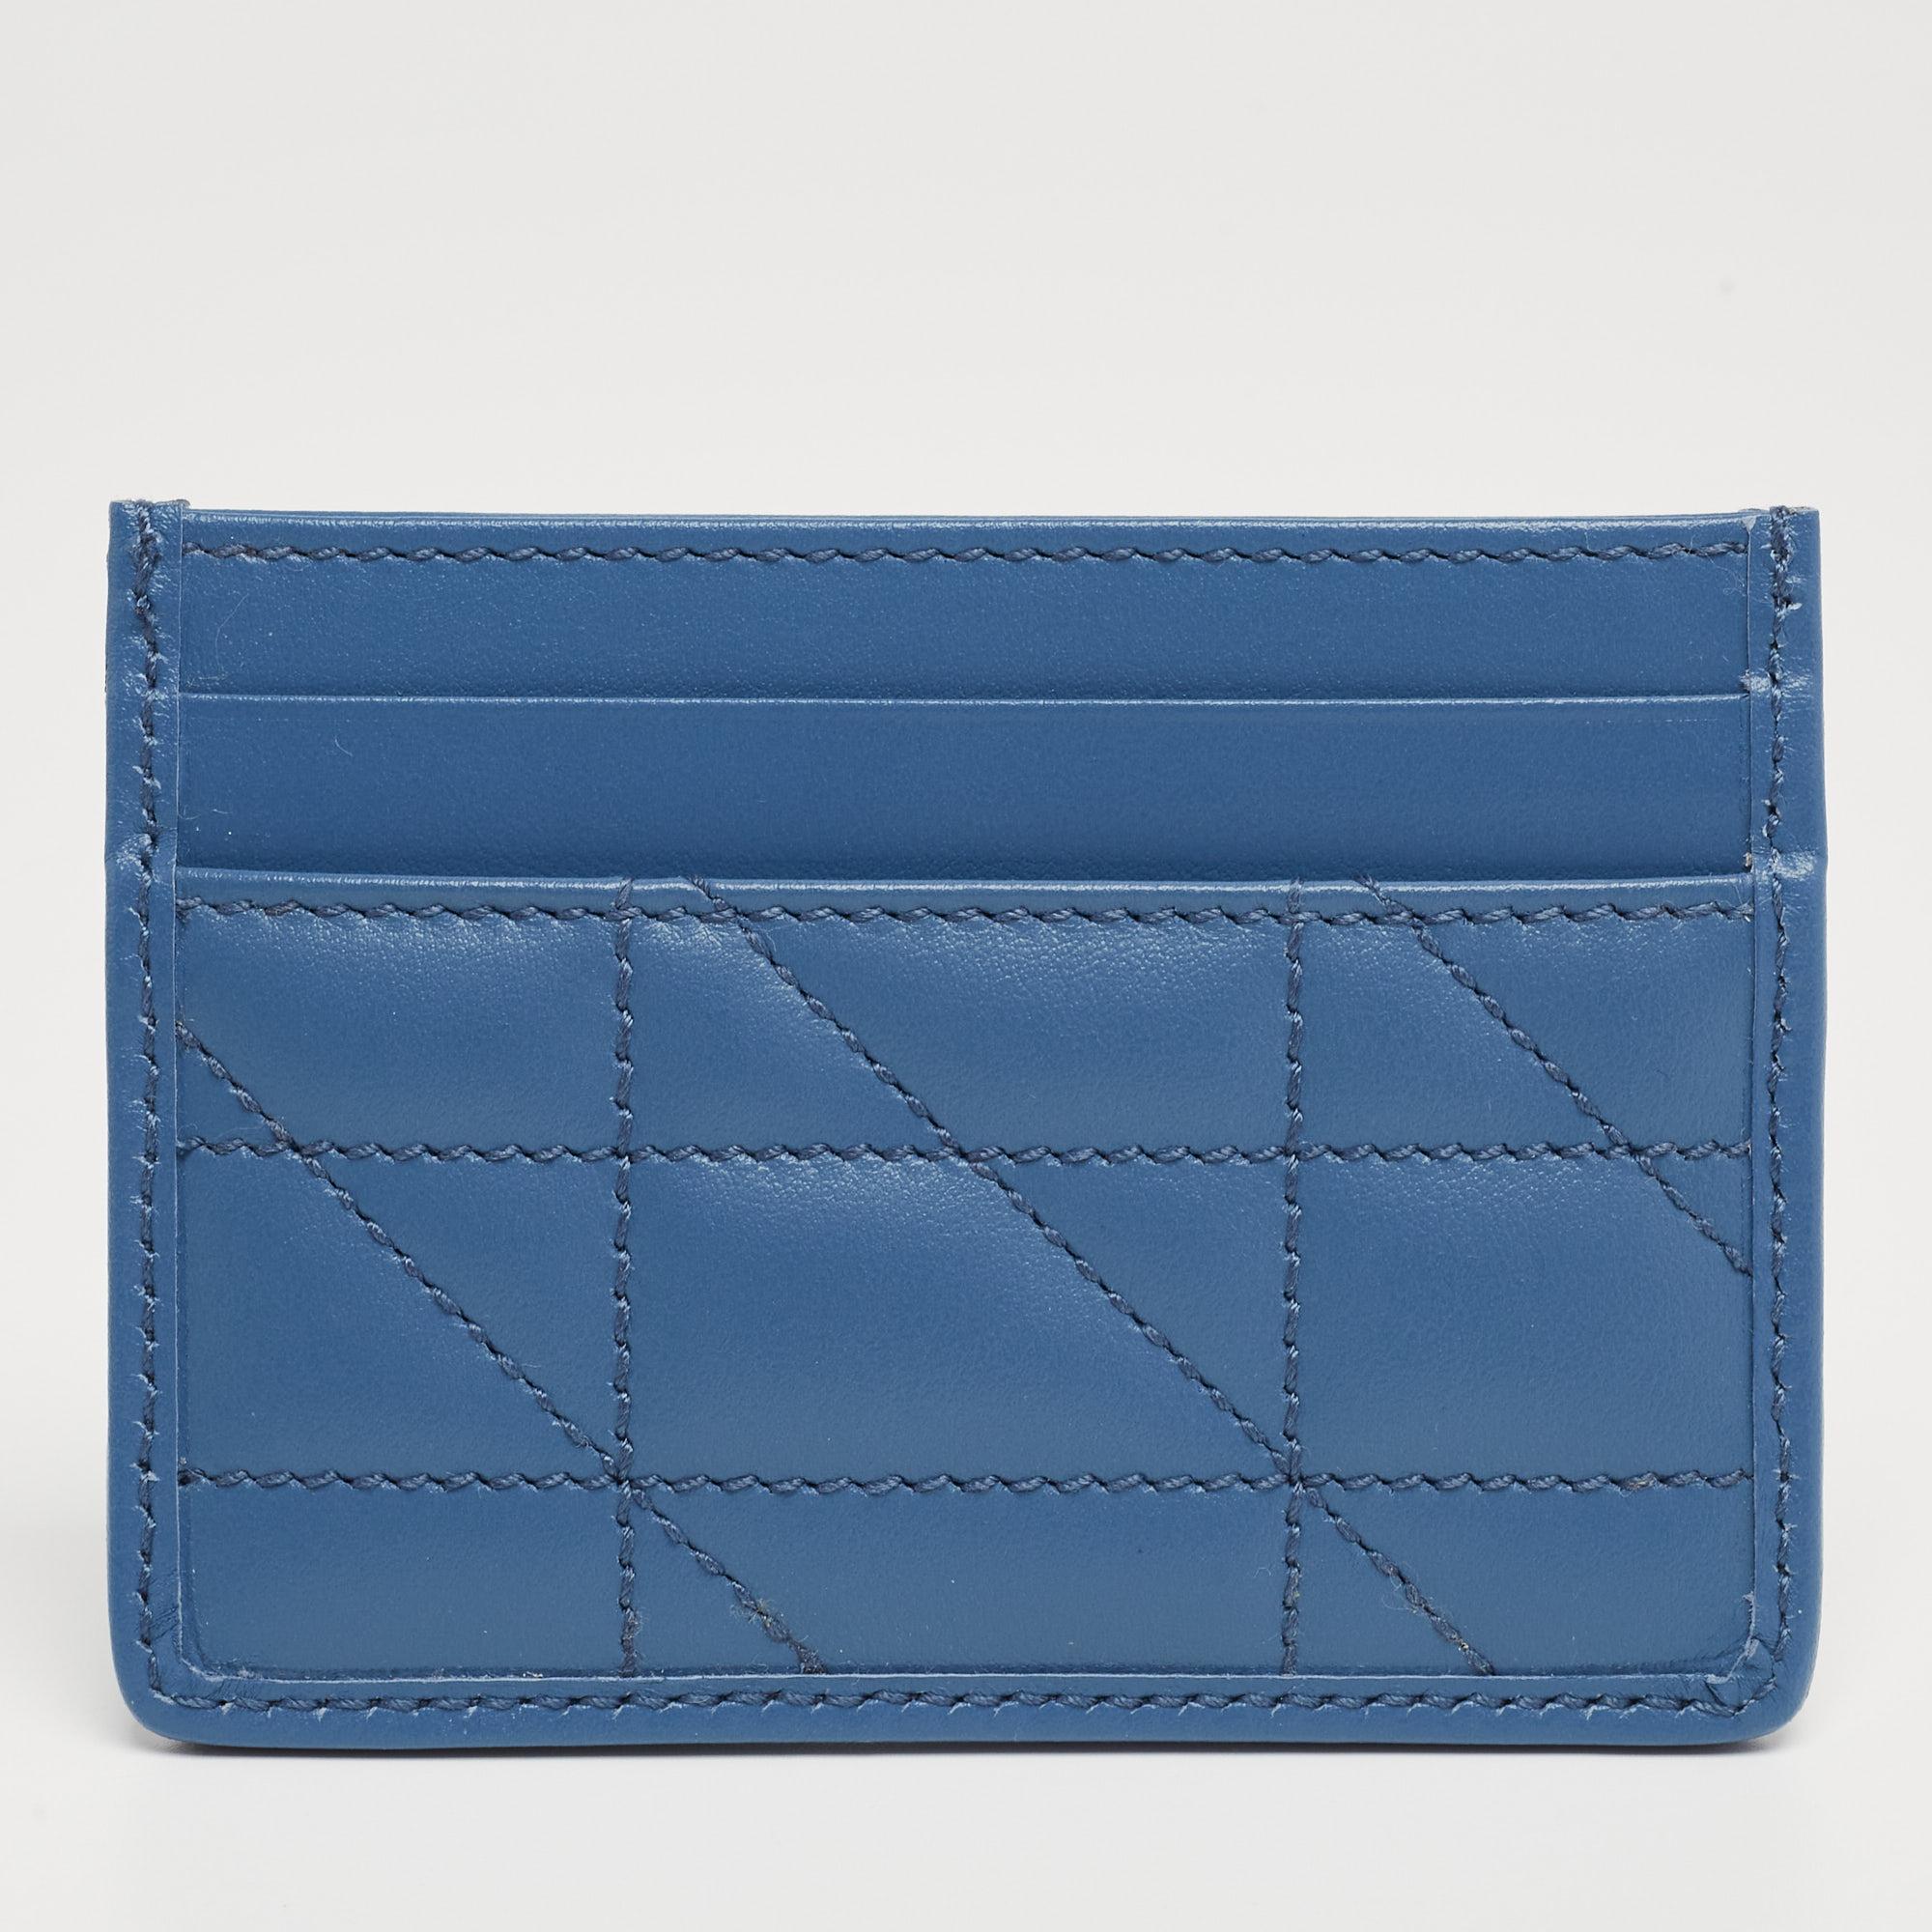 This Gucci card holder is a fine accessory to add to your everyday style edit. Crafted from quilted leather, it comes in blue and has lined slots to hold your essentials. The GG logo at the front gives it a luxe finish.

Includes: Original Box,